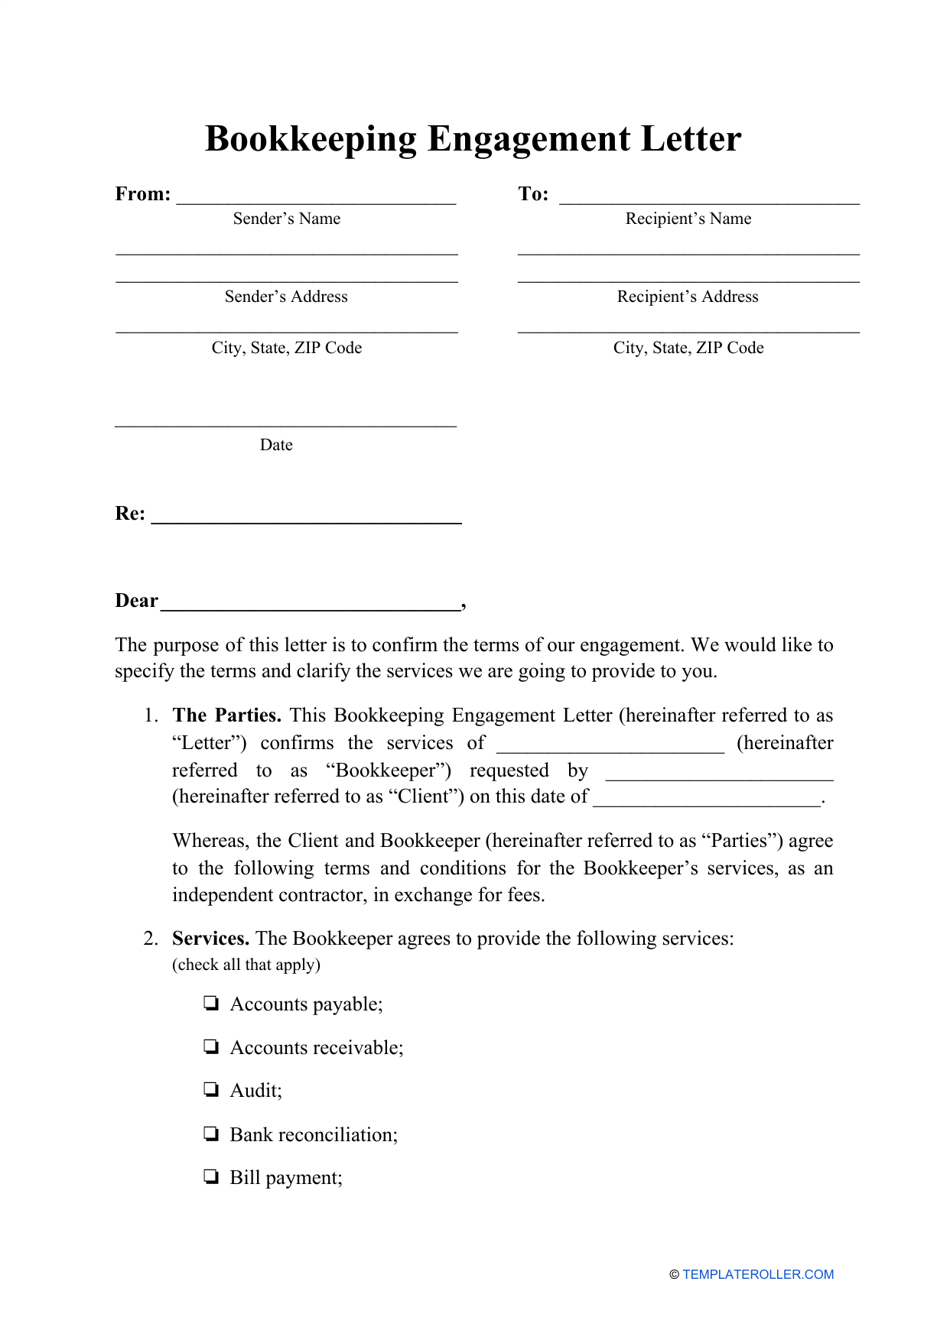 Bookkeeping Engagement Letter Template – Professional Form For Bookkeeping Services Agreement